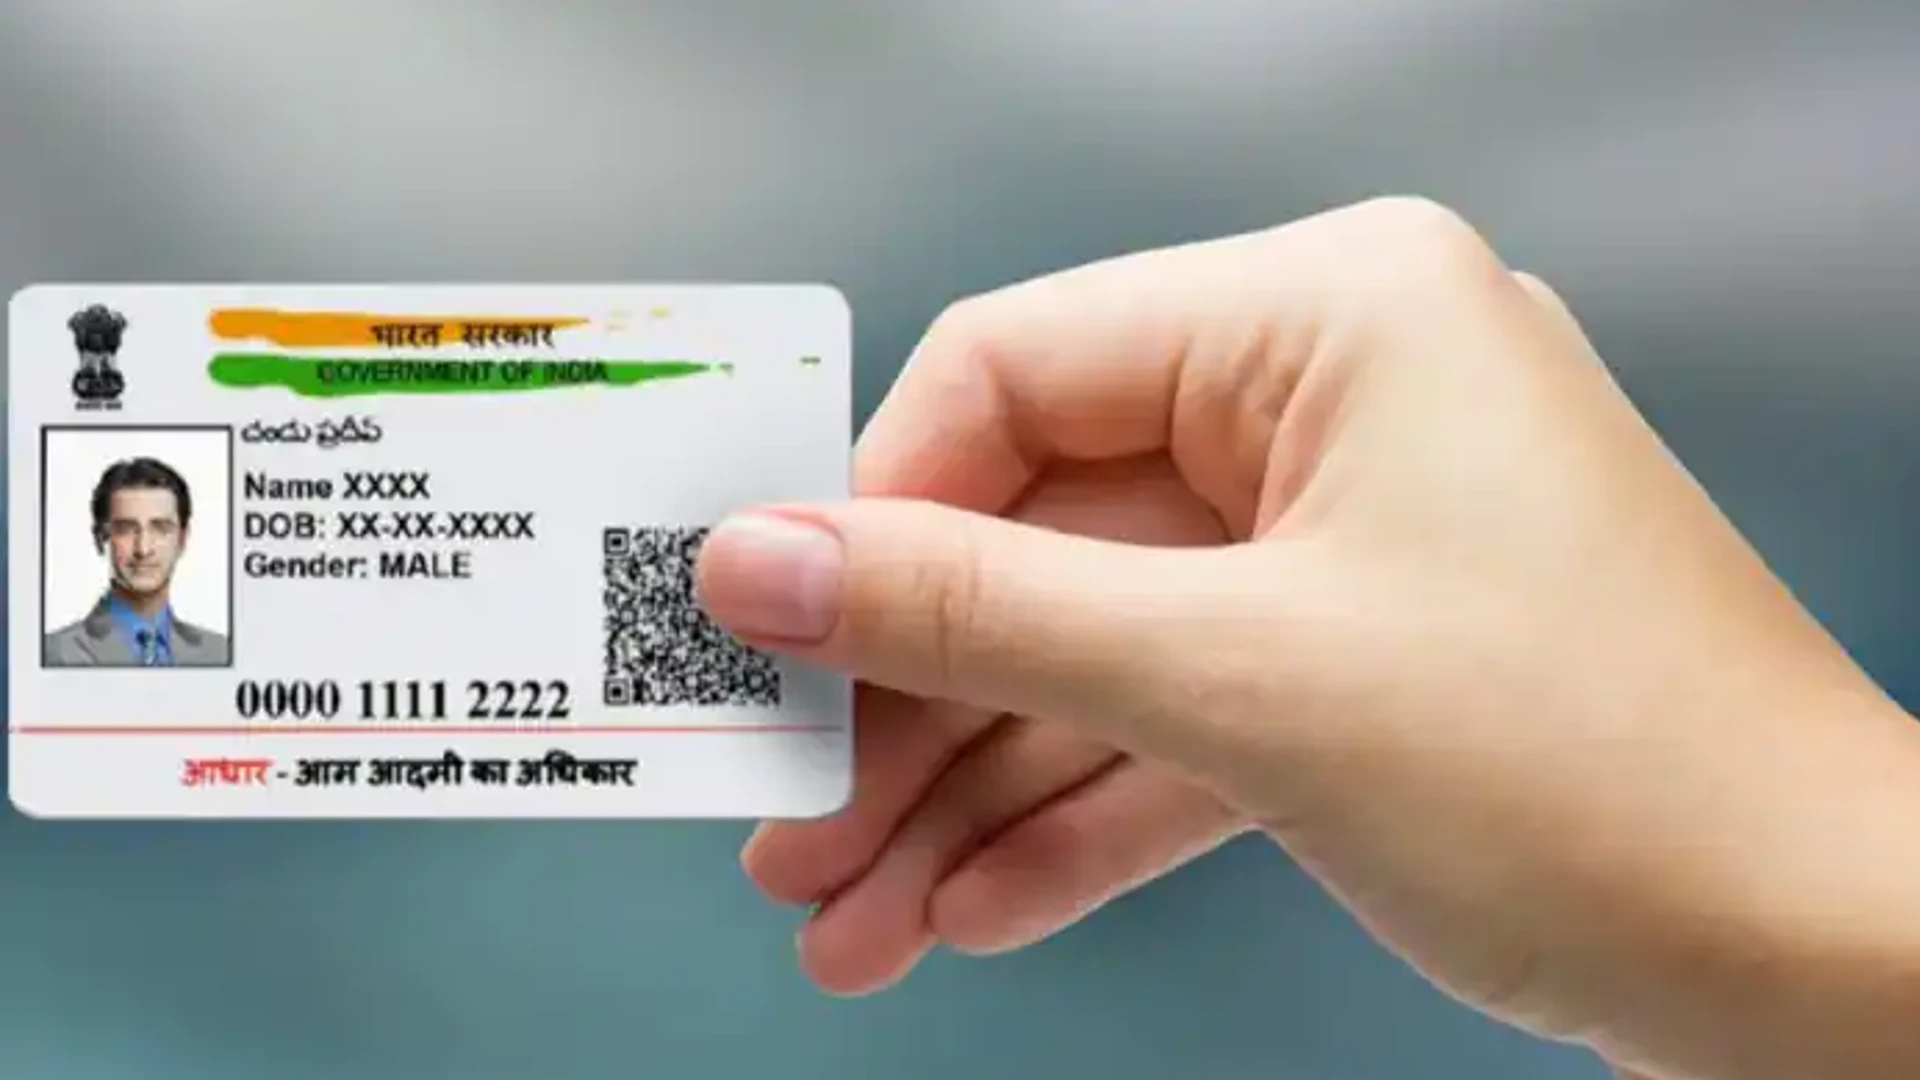 Aadhar Card Update: Want to change your photo on your Aadhar Card?